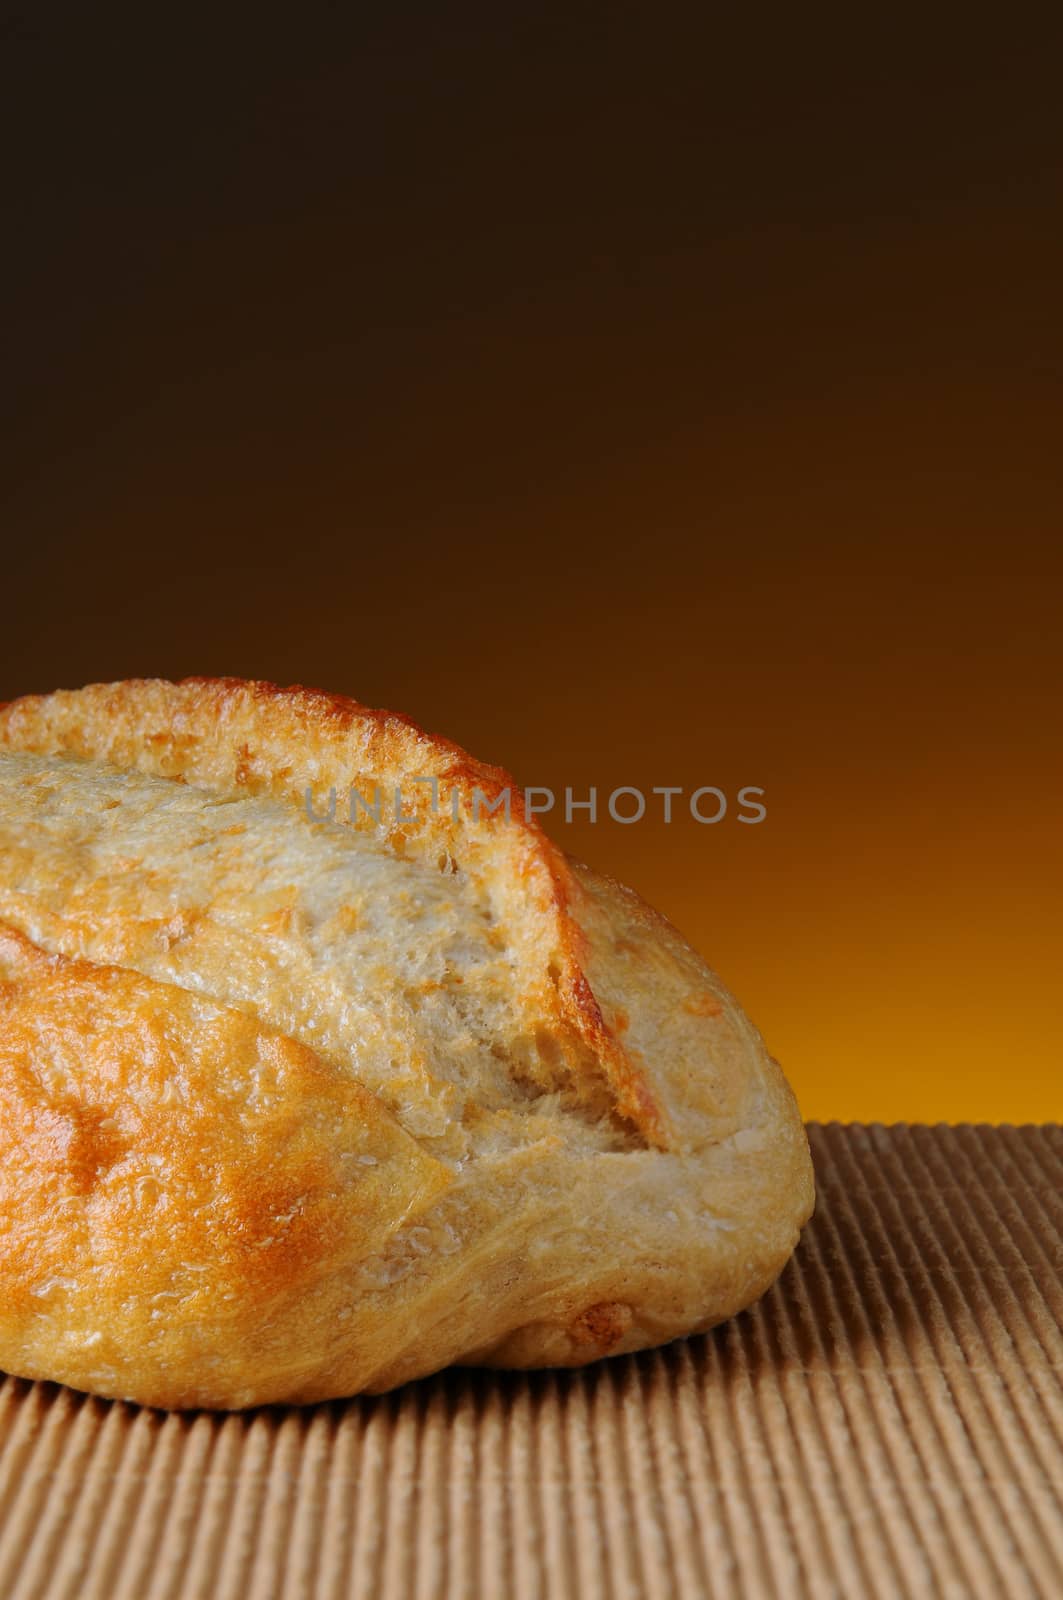 Closeup of a loaf of bread on a corrugated surface and a light to dark warm background.